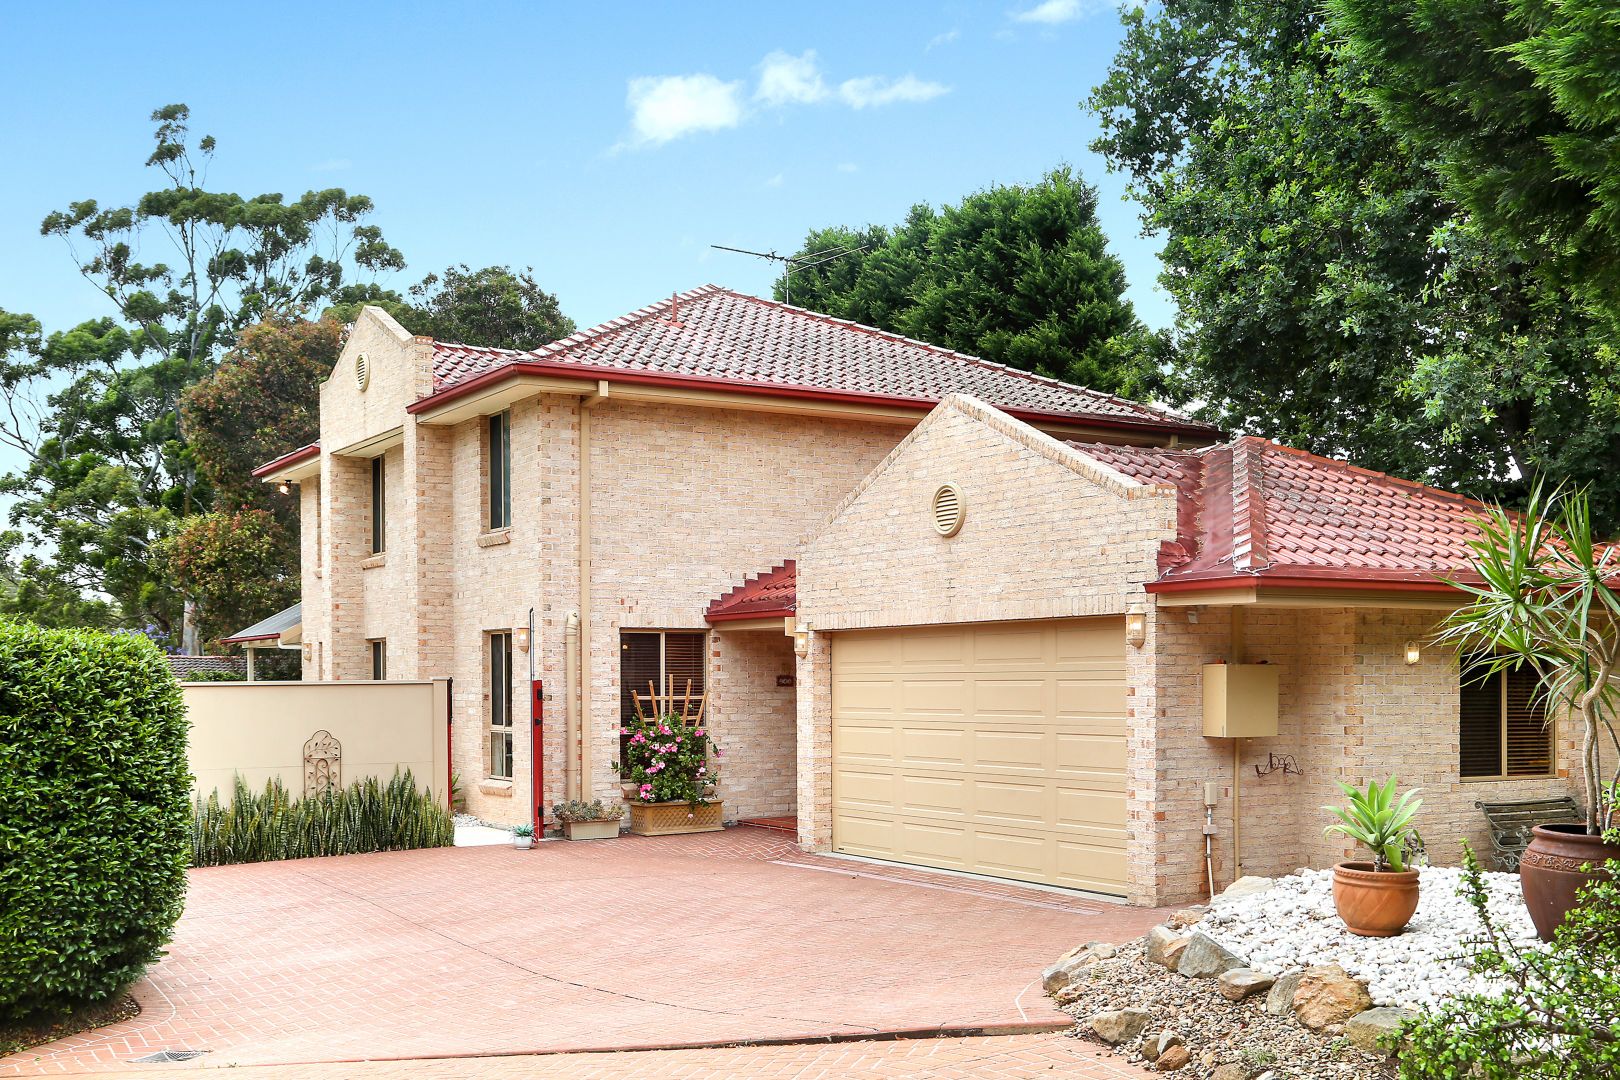 24A Waterloo Road, North Epping NSW 2121